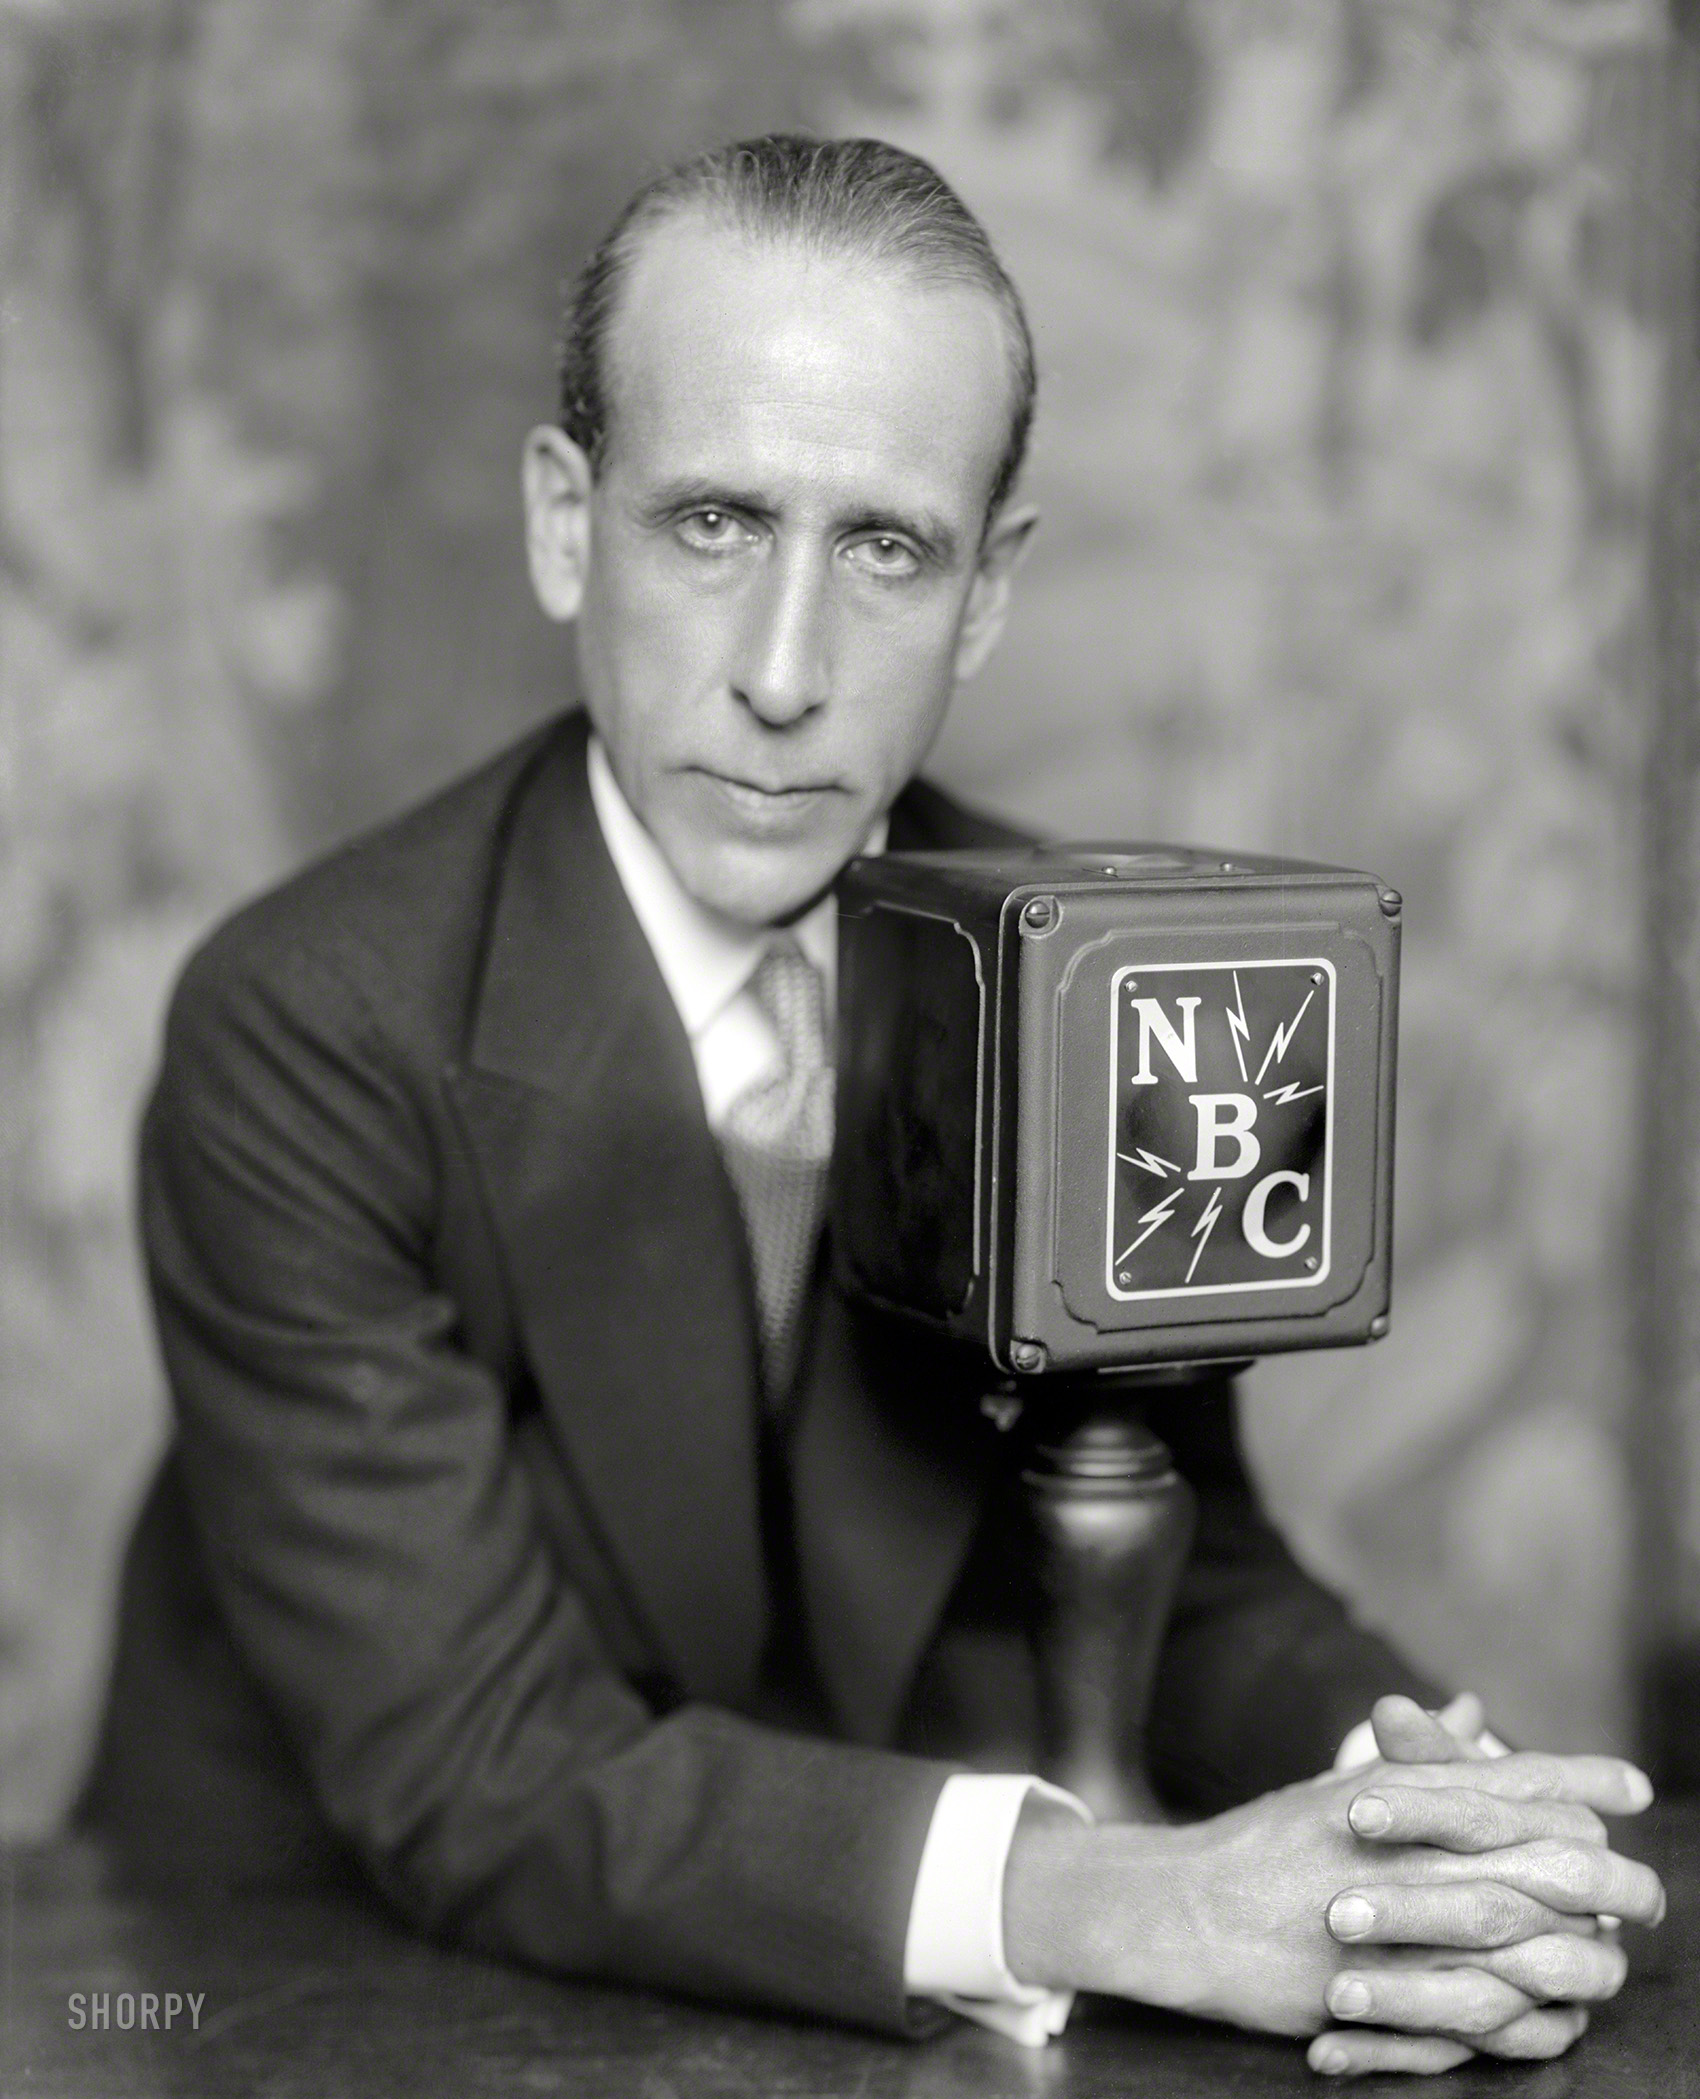 Washington, D.C., circa 1936. "Hard, William." Newsman, radio commentator and, later, Reader's Digest editor. Harris & Ewing glass negative. View full size.